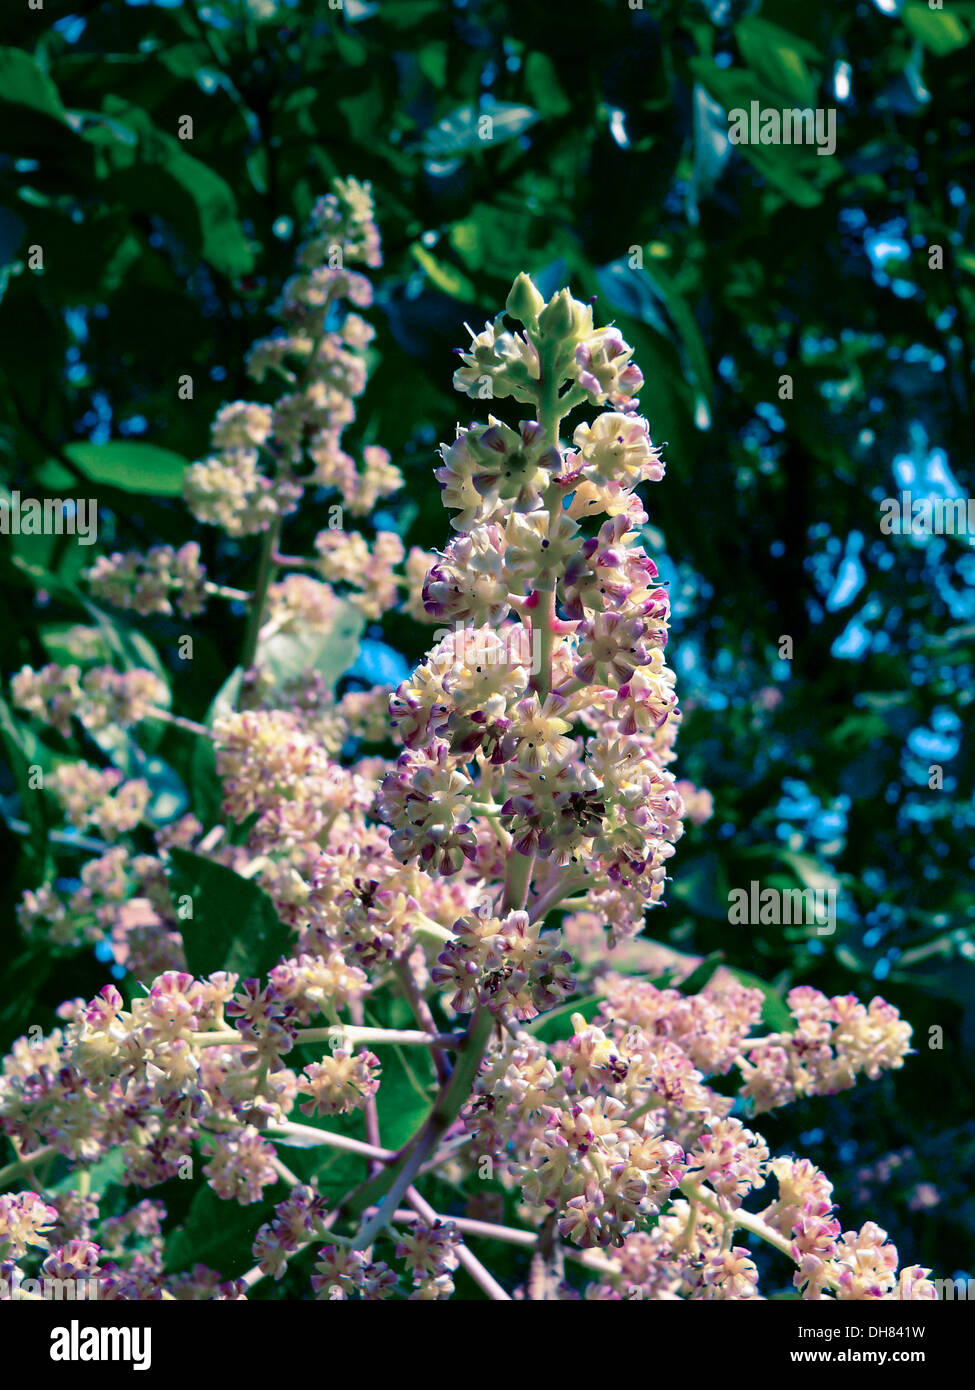 https://c8.alamy.com/comp/DH841W/mango-tree-in-bloom-with-mango-flowers-appear-in-spring-to-summer-DH841W.jpg